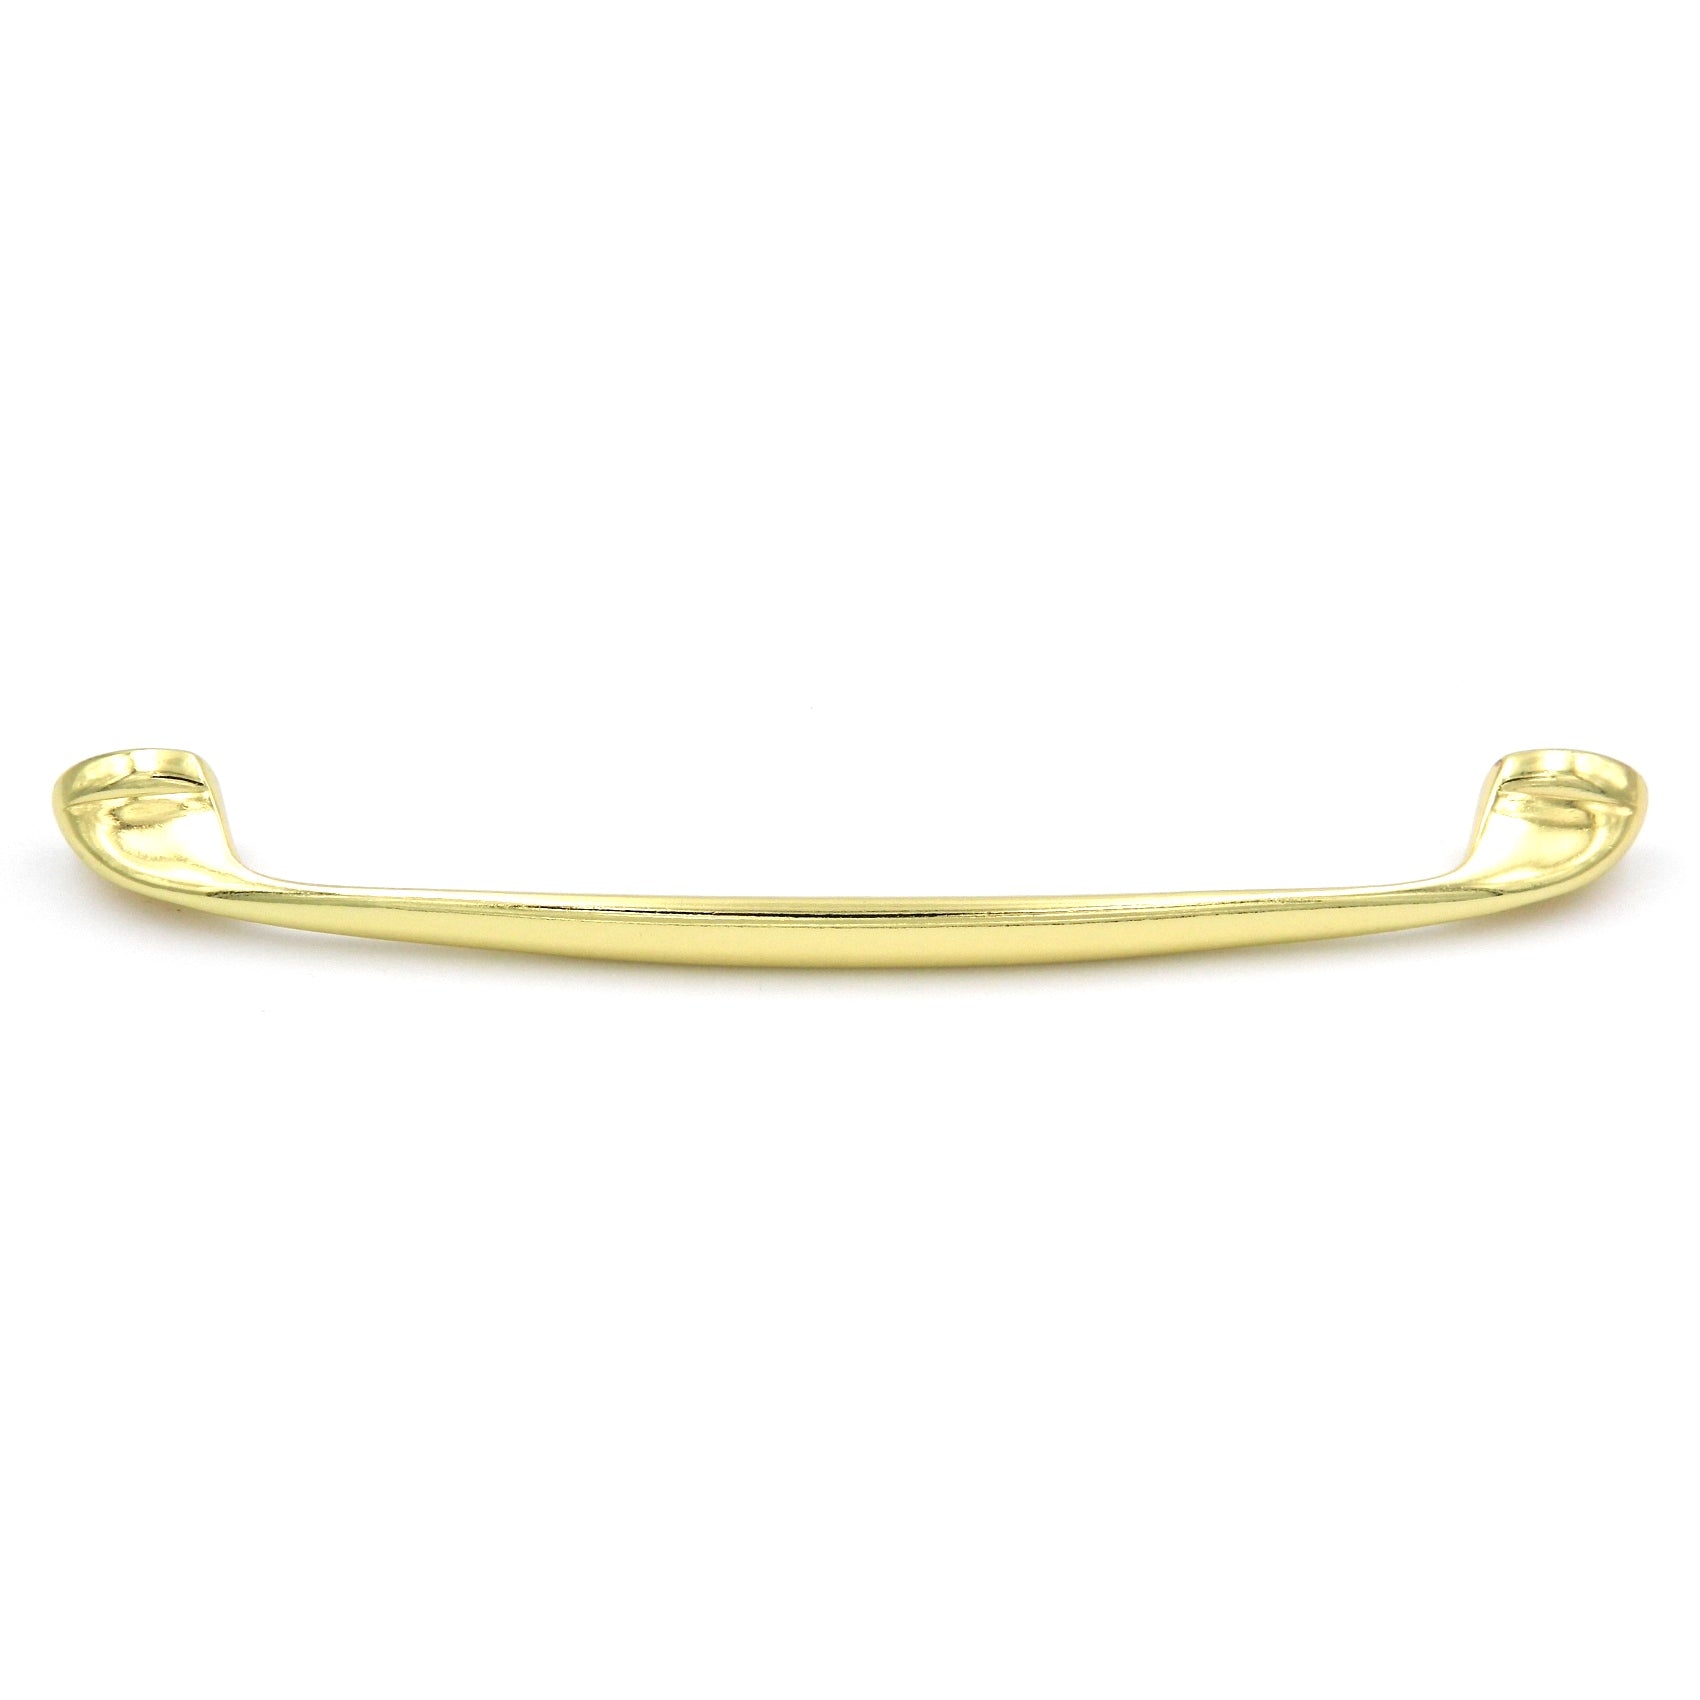 20 Pack Hickory Altair P3080-PB Polished Brass 6 1/4" (160mm)cc Arch Cabinet Handle Pull